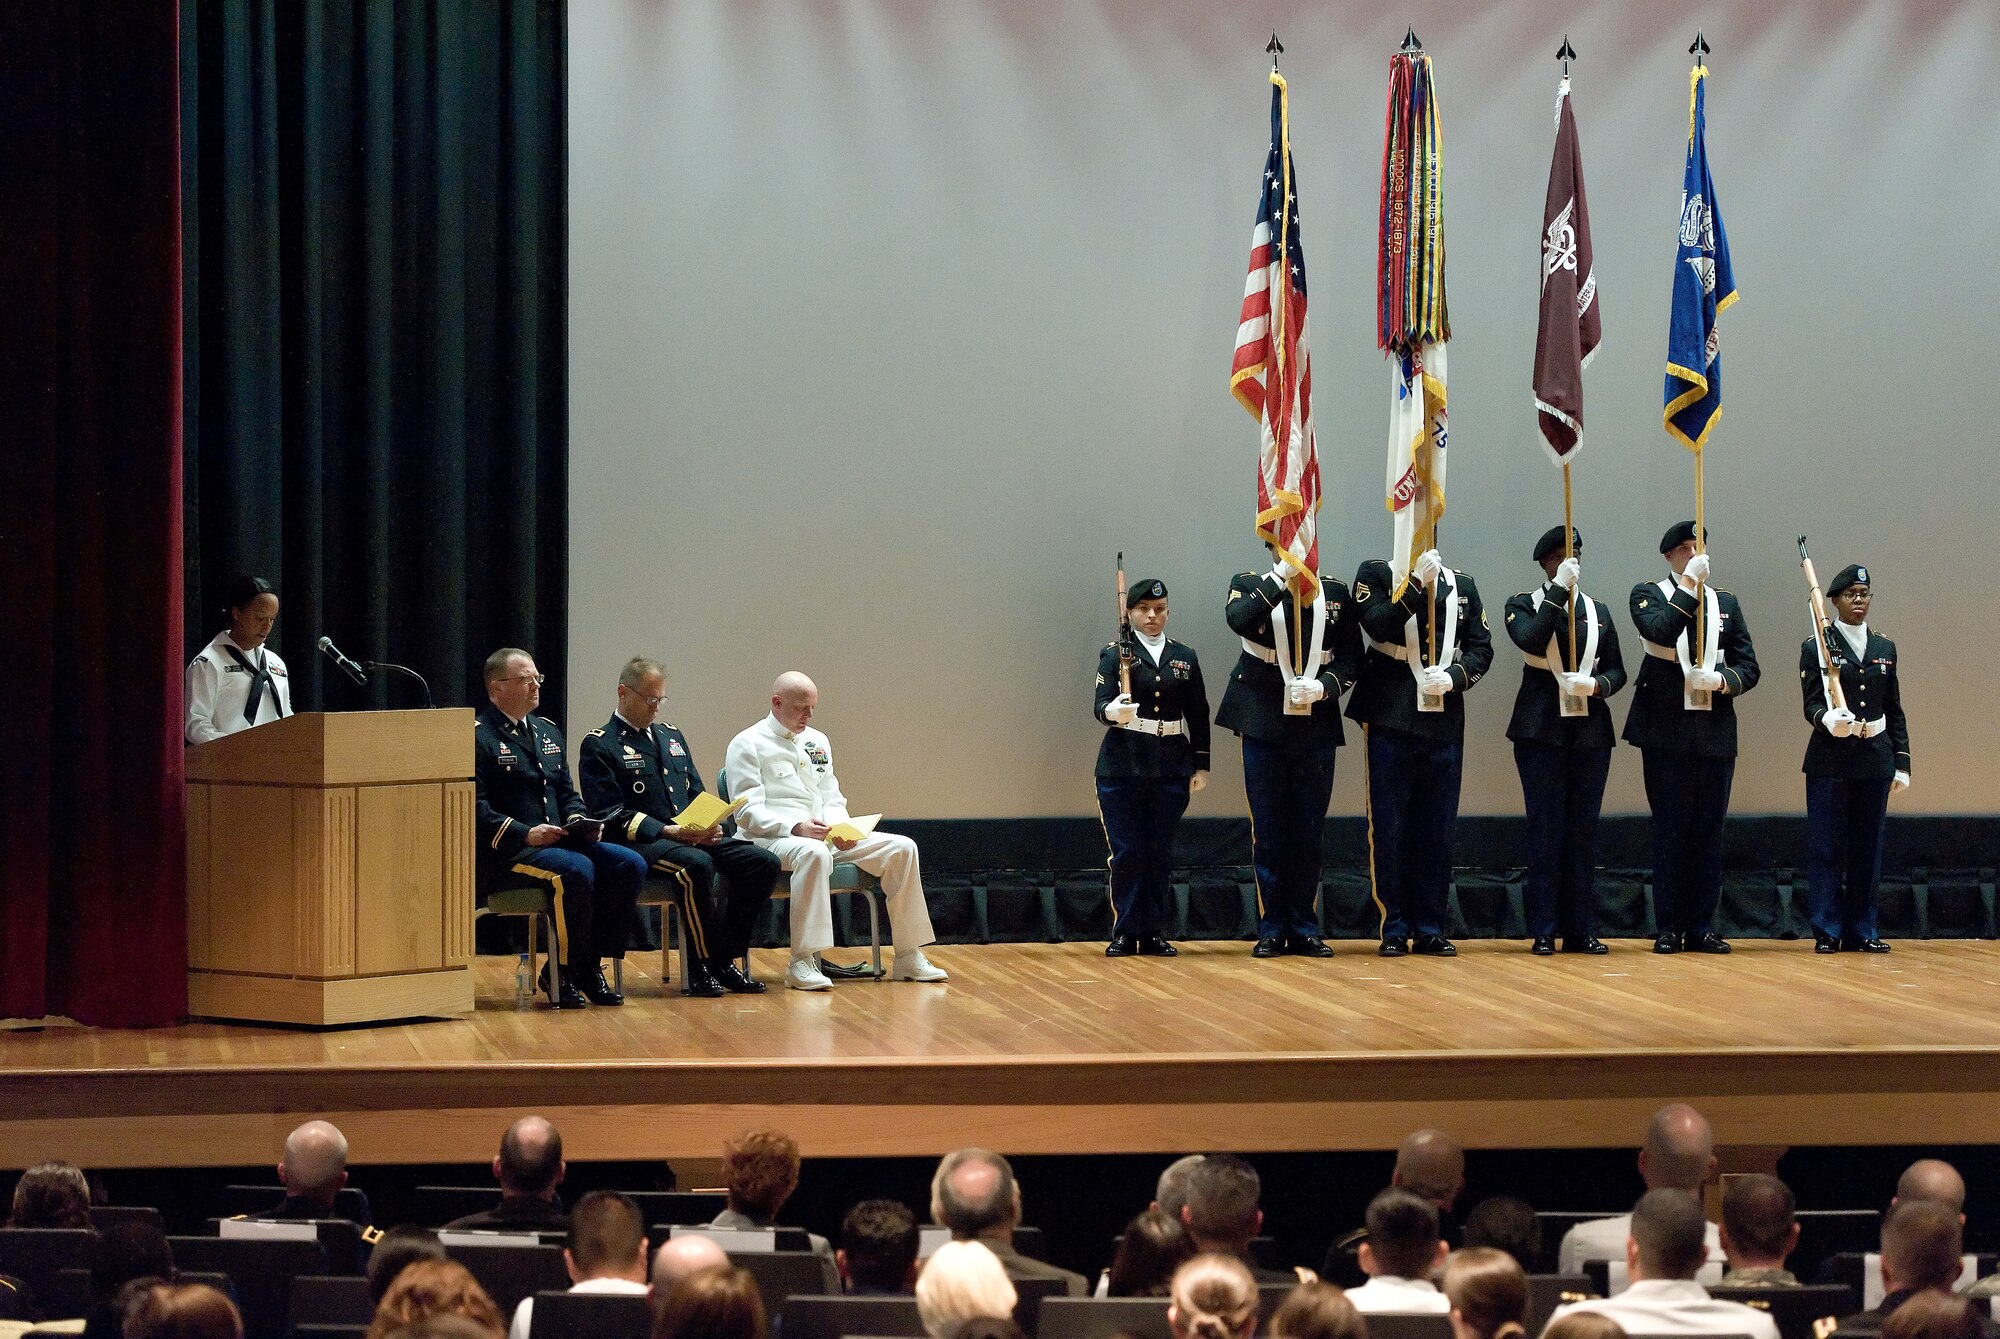 A U.S. Army Color Guard presents the colors prior to casing of the Armed Forces Medical Examiner colors Aug. 31, 2015, at the Base Theater on Dover Air Force Base, Del. Over the years, AFMES transitioned from the Armed Forces Institute of Pathology to the U.S. Army Medical Research and Material Command in the fall of 2011 with its move to Dover AFB and AFMES was formally transferred from MRMC to the Defense Health Agency in the flag-casing ceremony. (U.S. Air Force photo/Roland Balik)